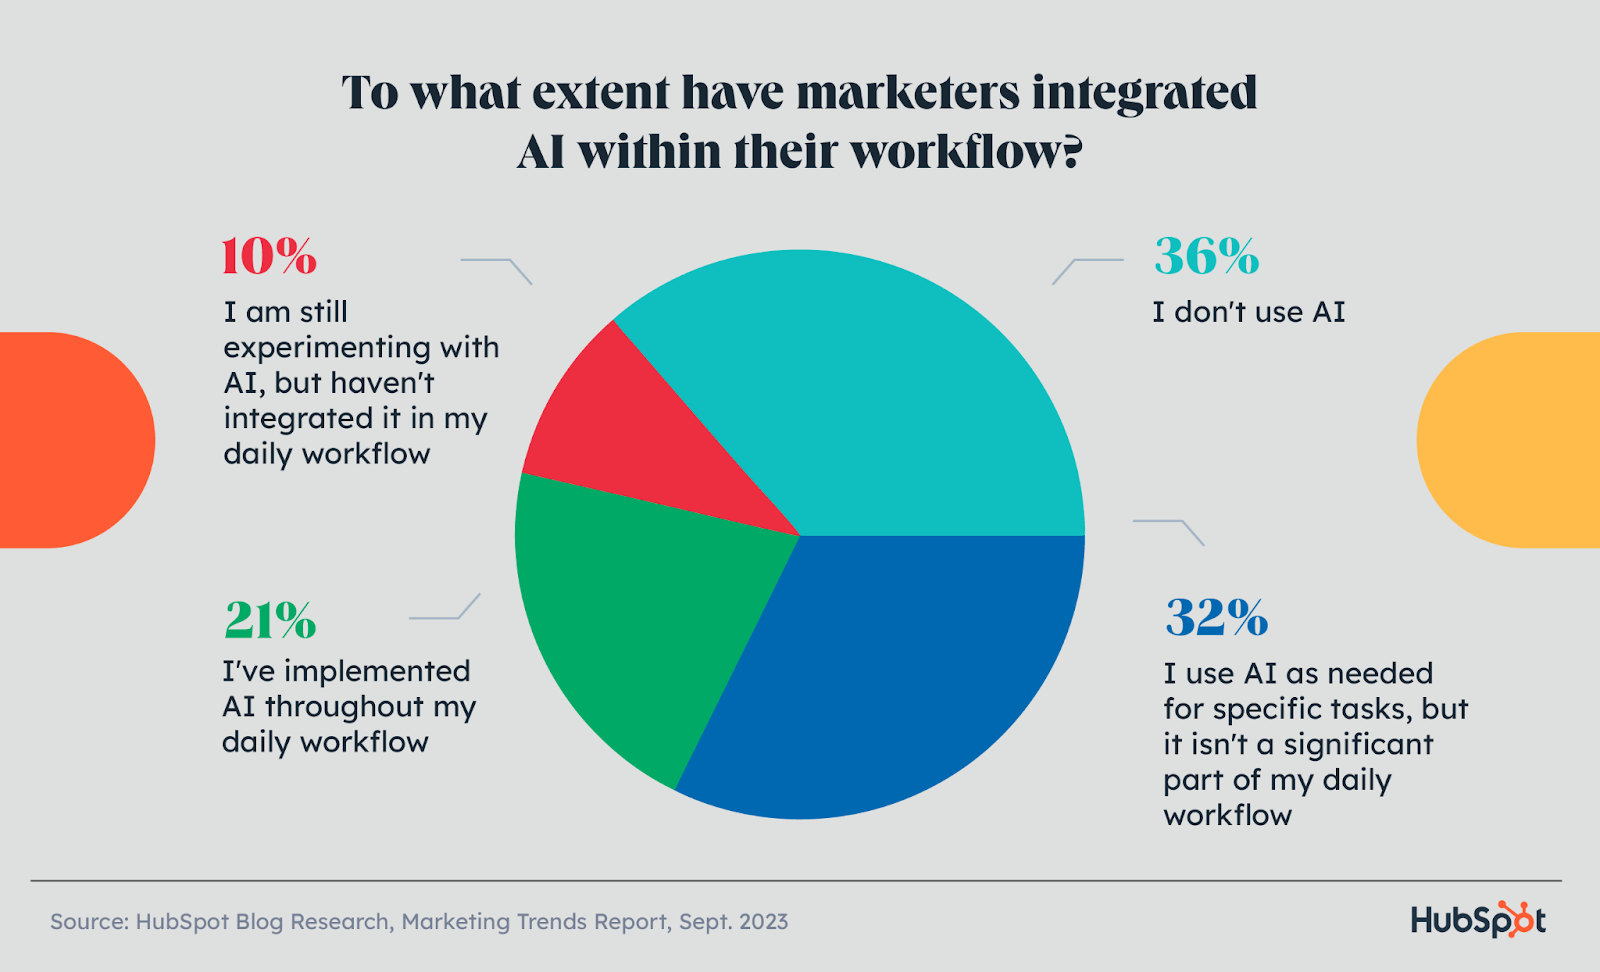 To what extent have marketers integrated AI in their workplace